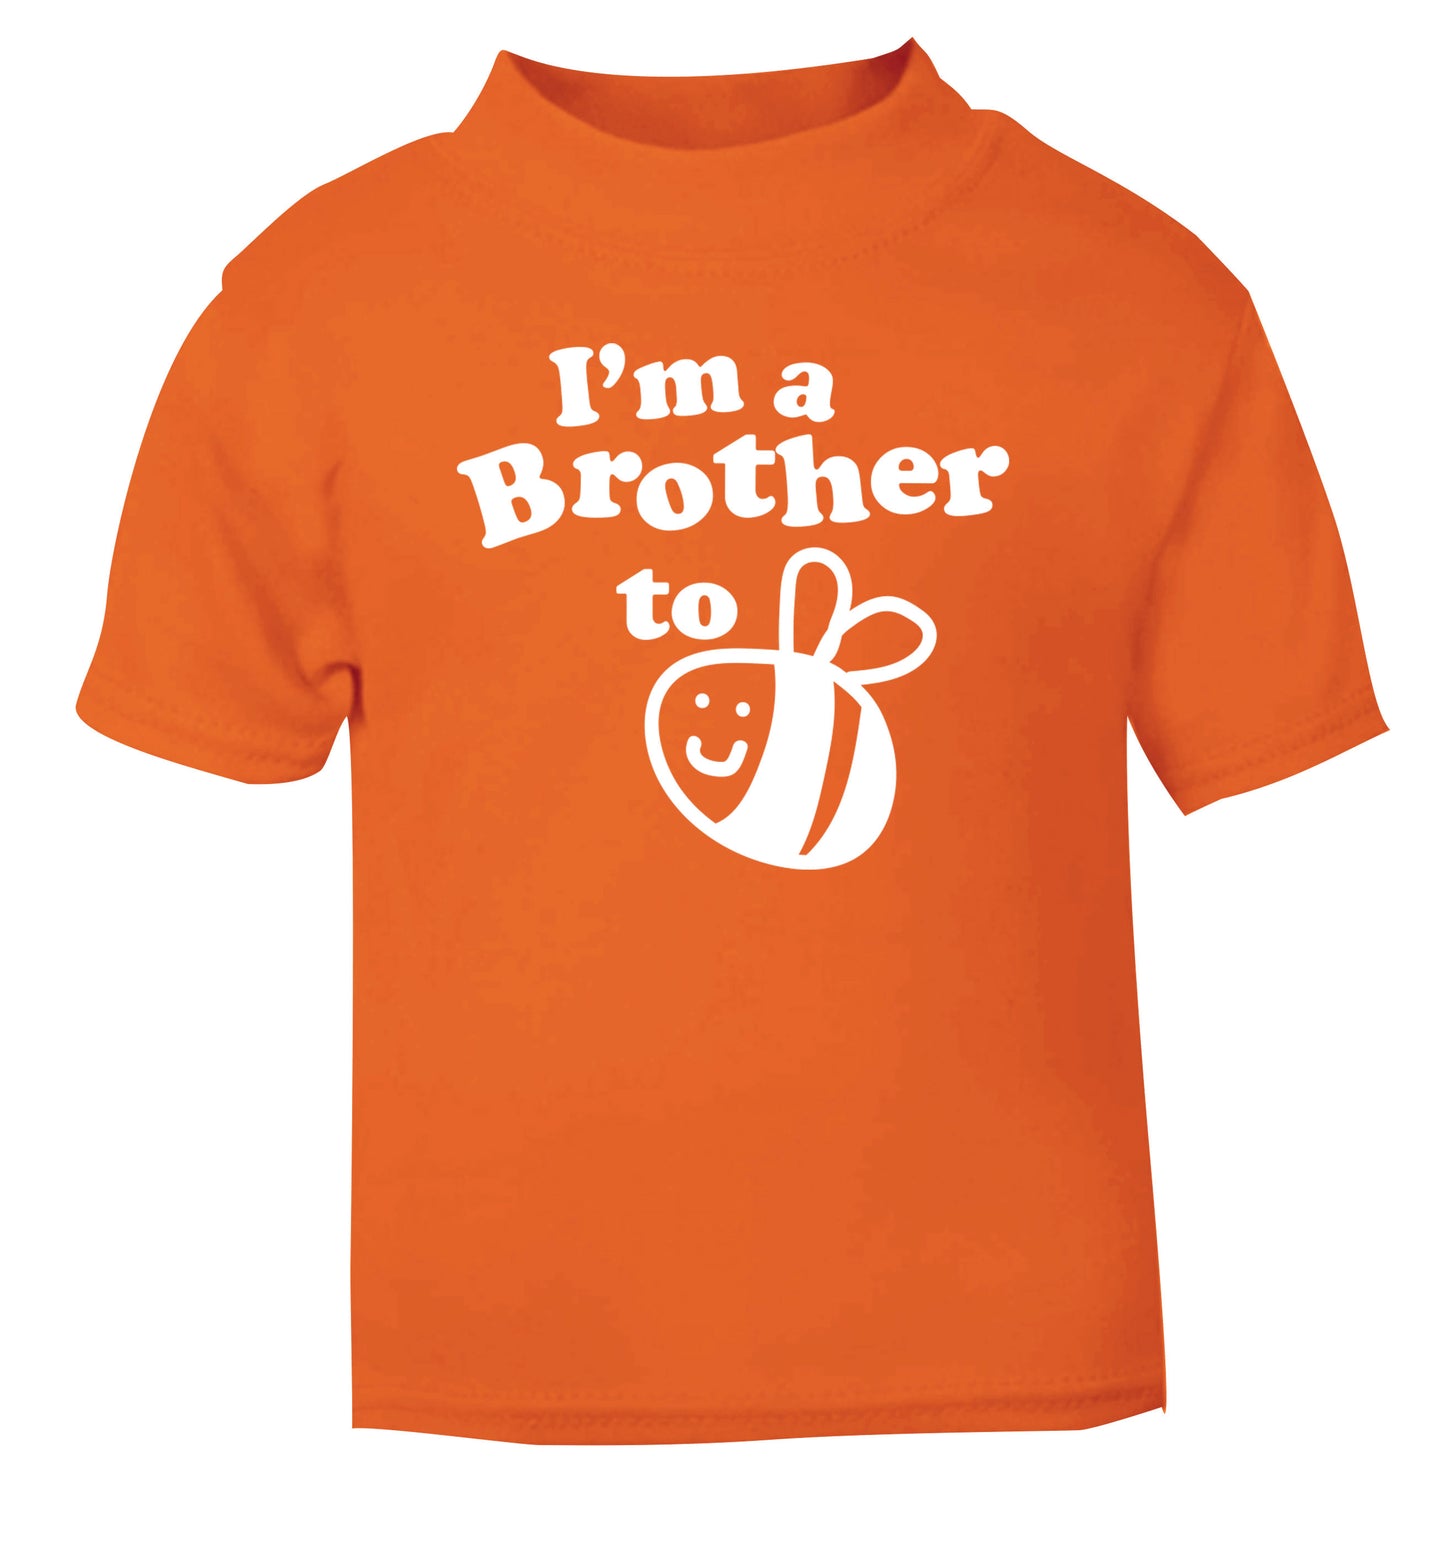 I'm a brother to be orange Baby Toddler Tshirt 2 Years